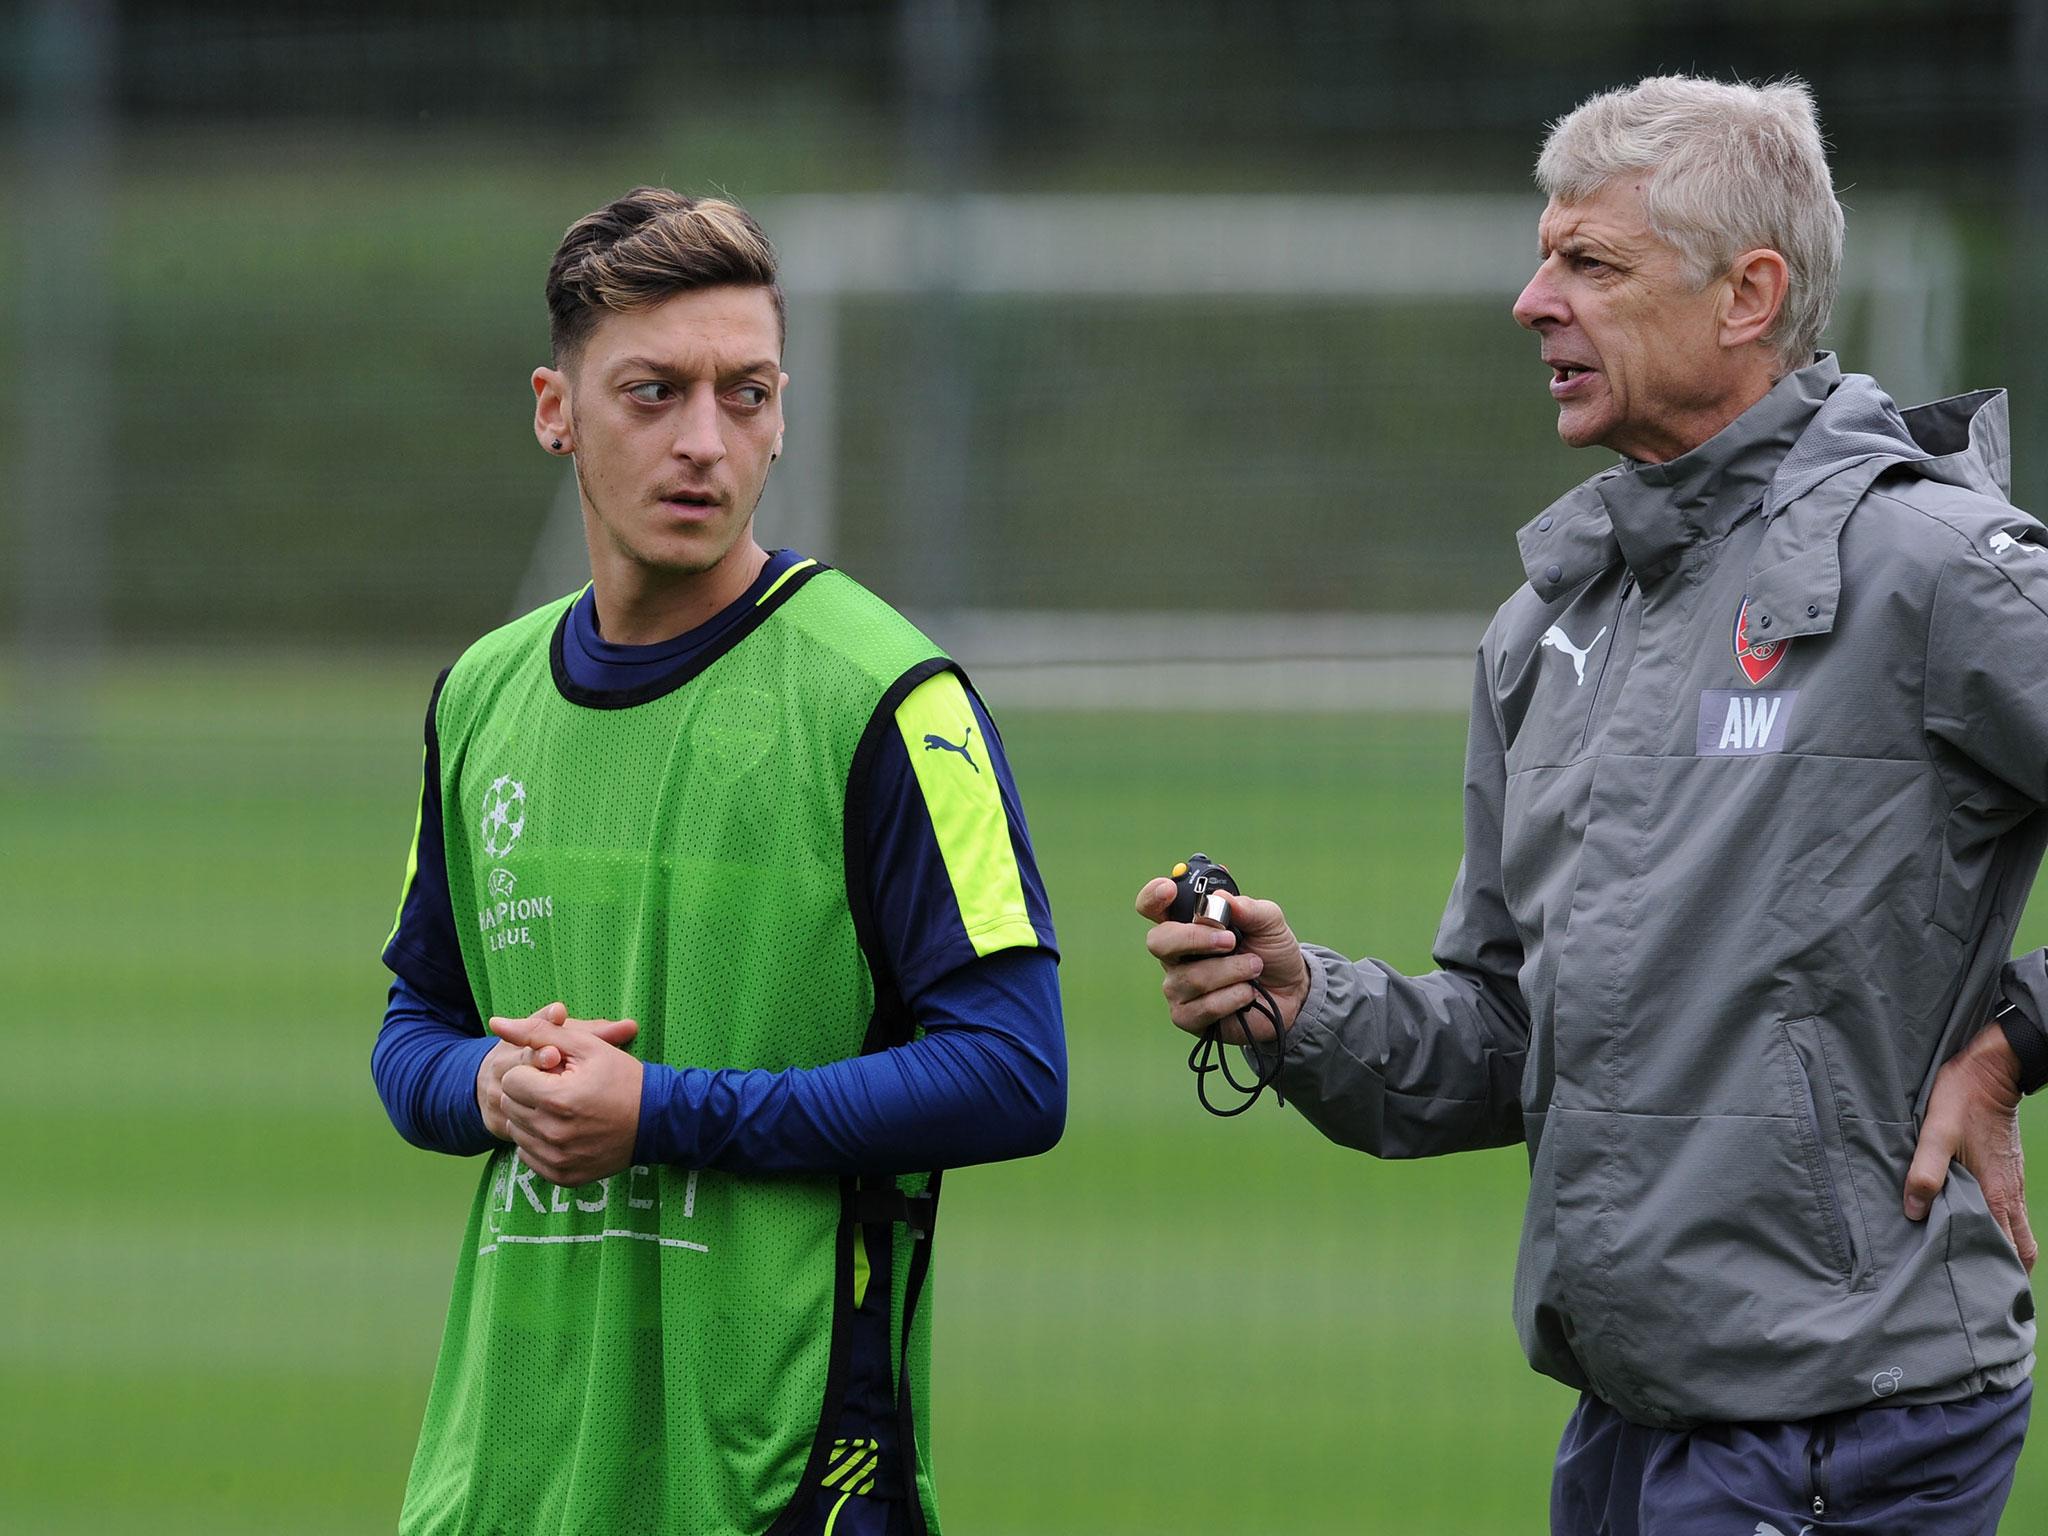 Arsene Wenger has played down the importance of his own future on Mesut Özil's contract negotiations